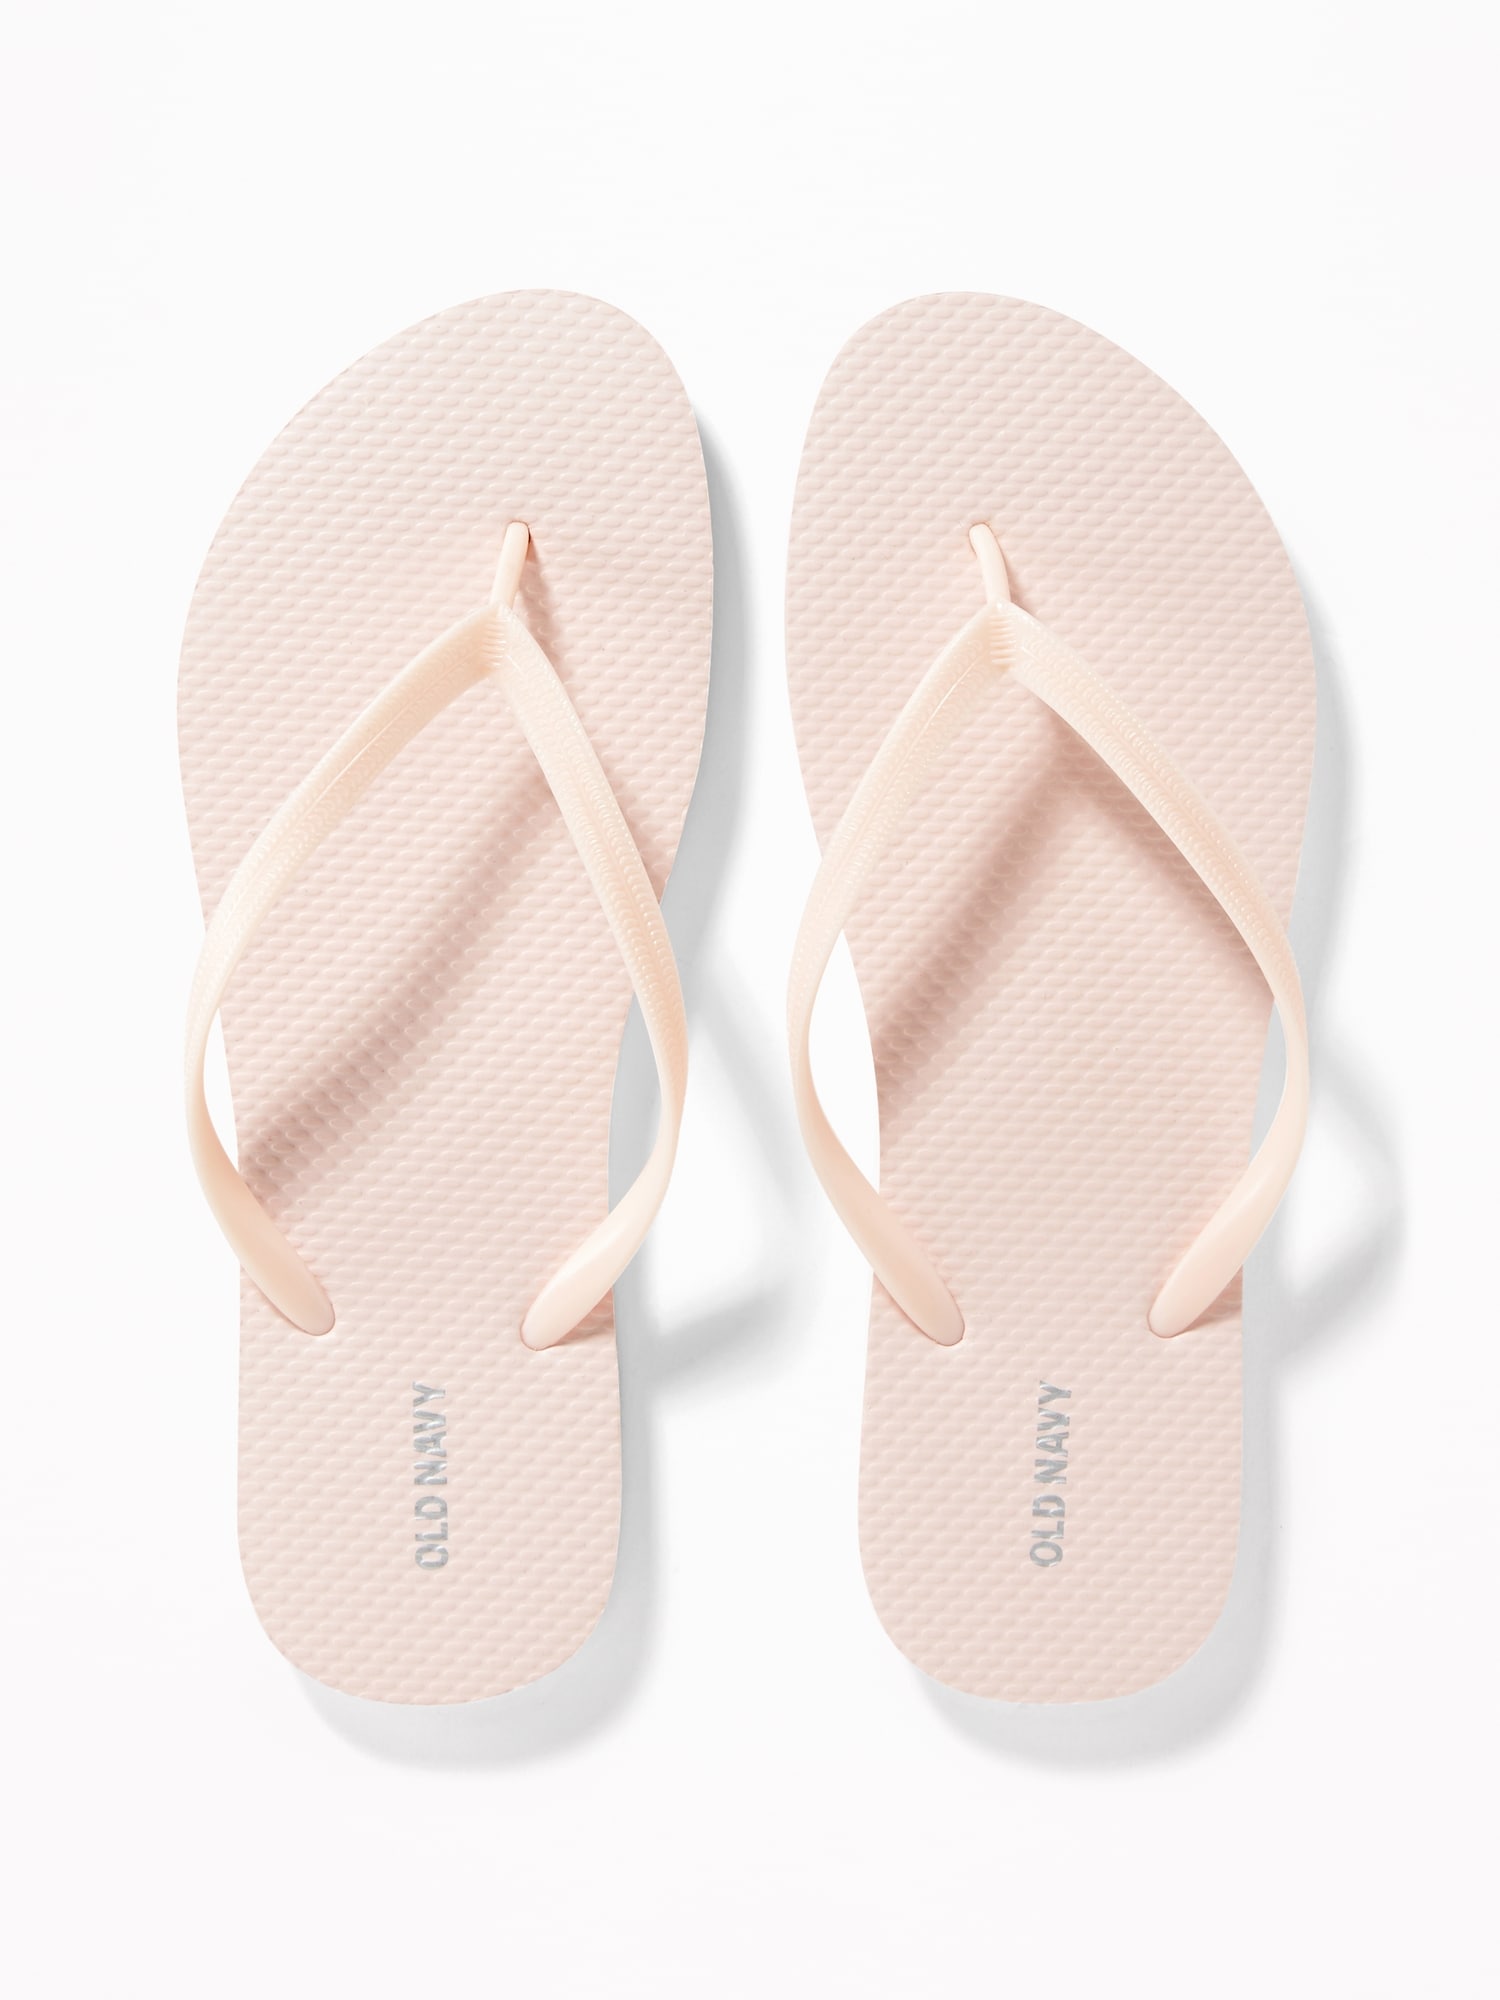 Old Navy’s $1 Dolla Balla Flip-Flop sale is back in time for summer ...